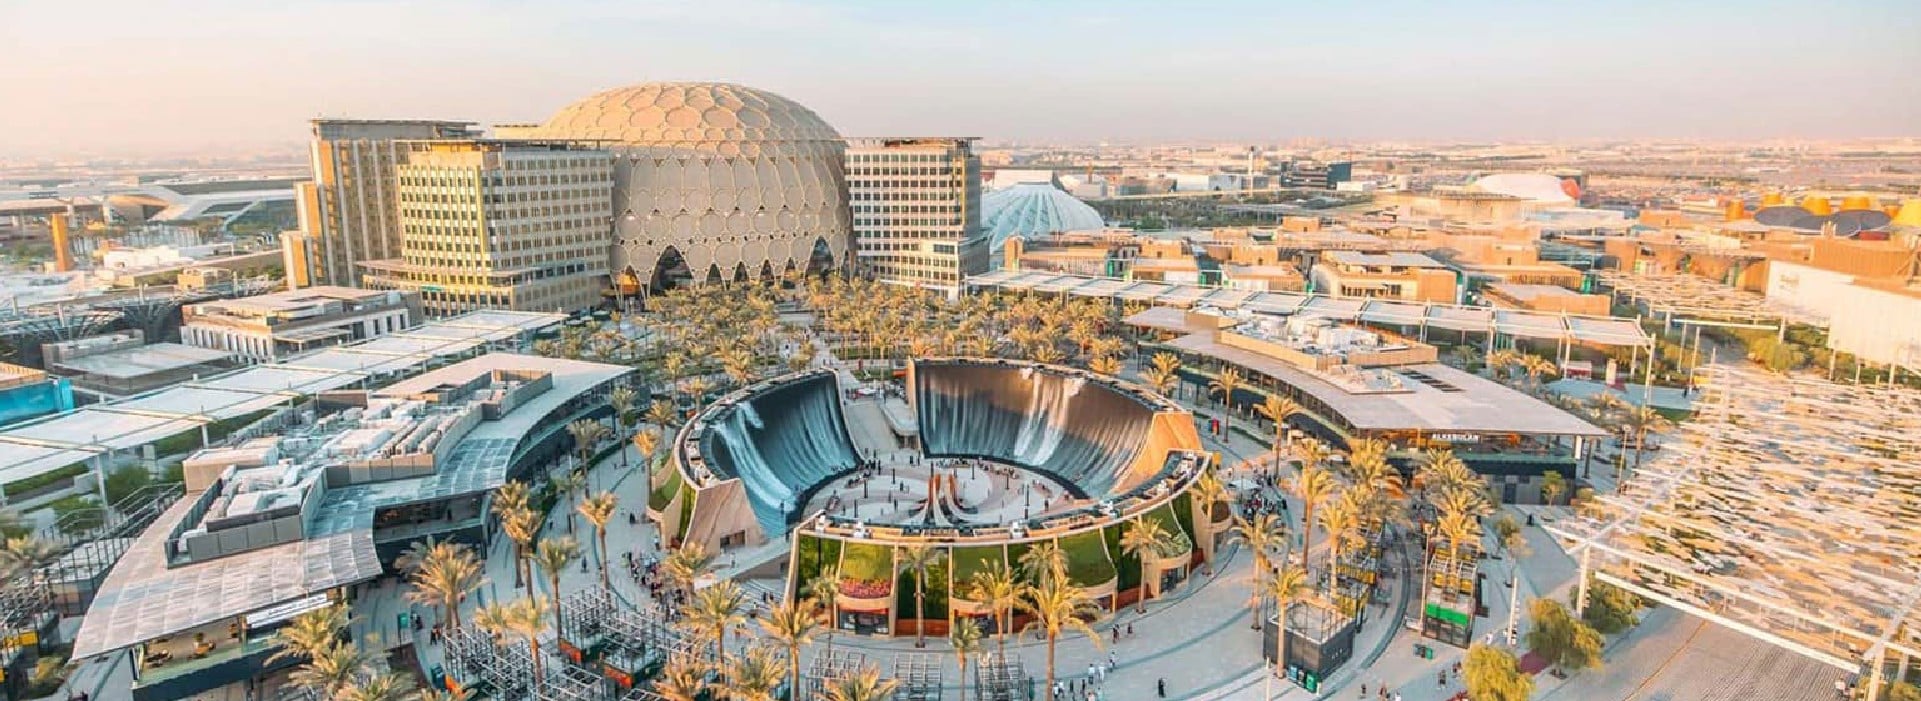 Expo City Dubai, beautiful view of old Expo 2020 location maintained for tourism